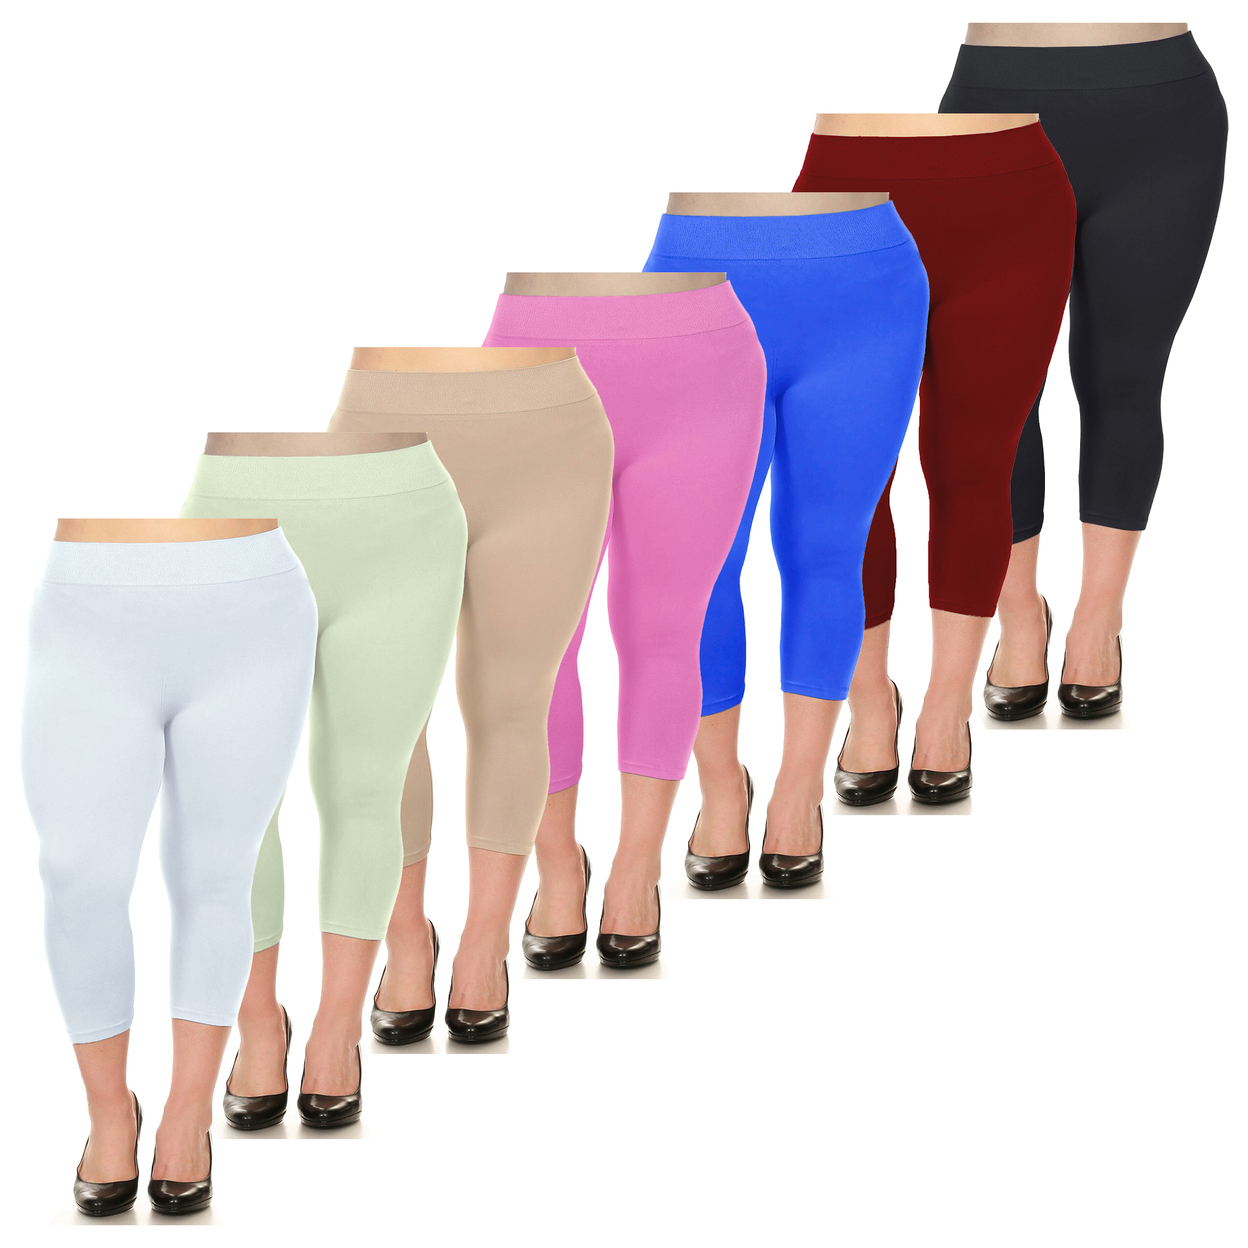 2-Pack: Women's Ultra-Soft High Waisted Smooth Stretch Active Yoga Capri Leggings Plus Size Available - Red & Red, 1x